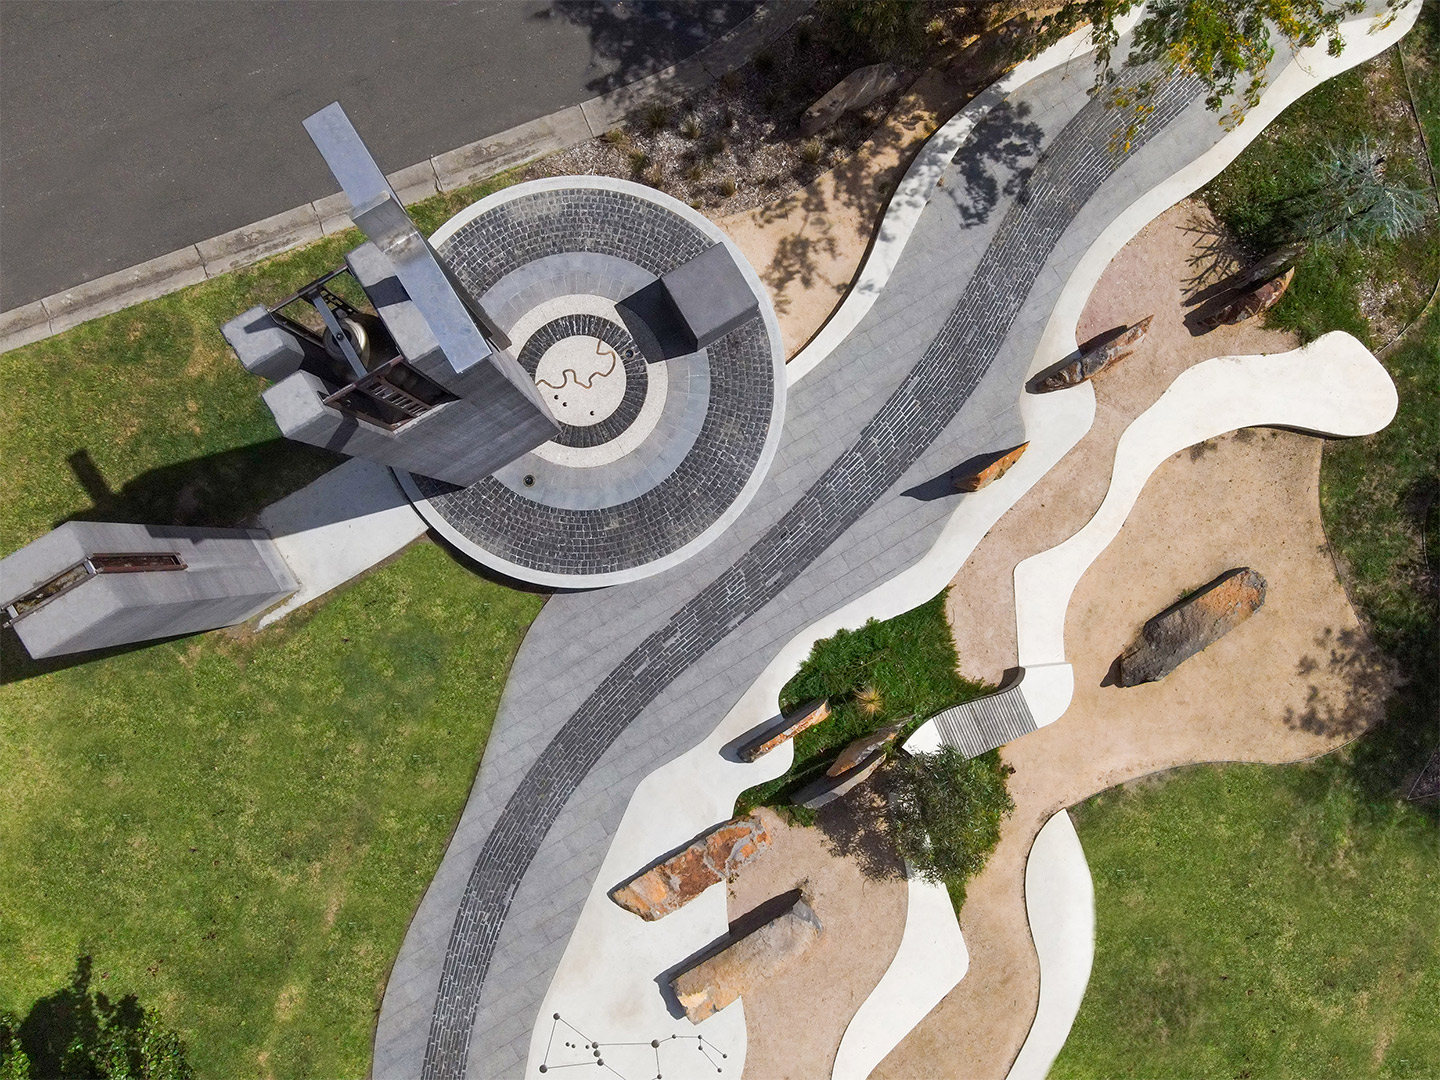 The best garden and landscaping ideas of 2021 have been revealed by the Australian Institute of Landscape Architects. 